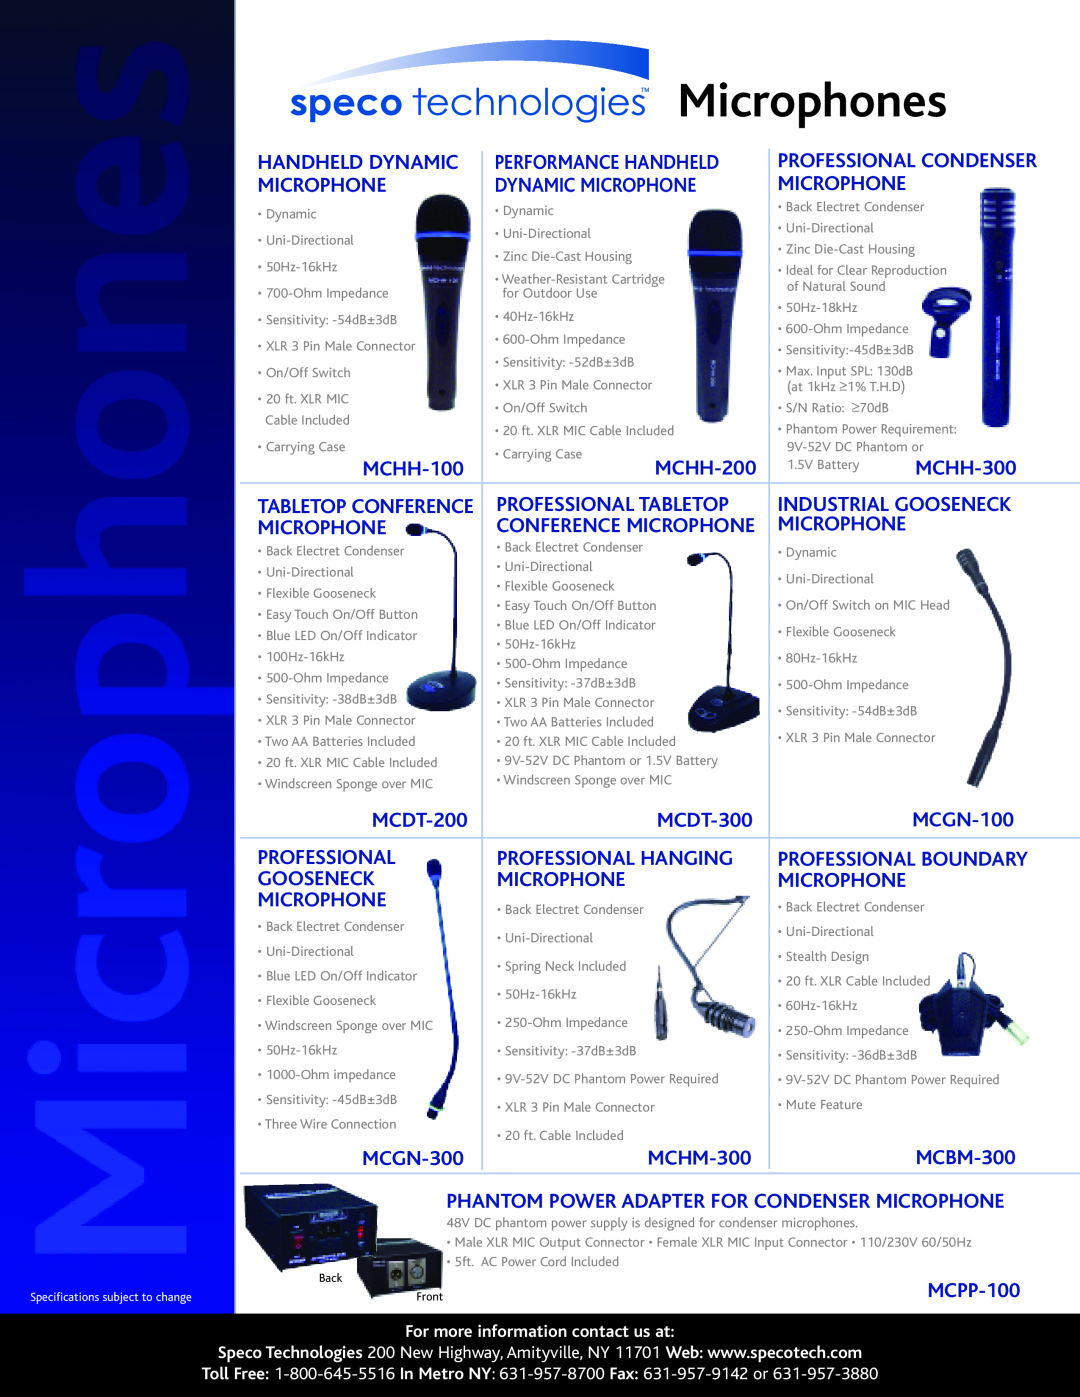 Speco Technologies MCHM-300 specifications Microphones, Handheld Dynamic, Performance Handheld, Professional Condenser 